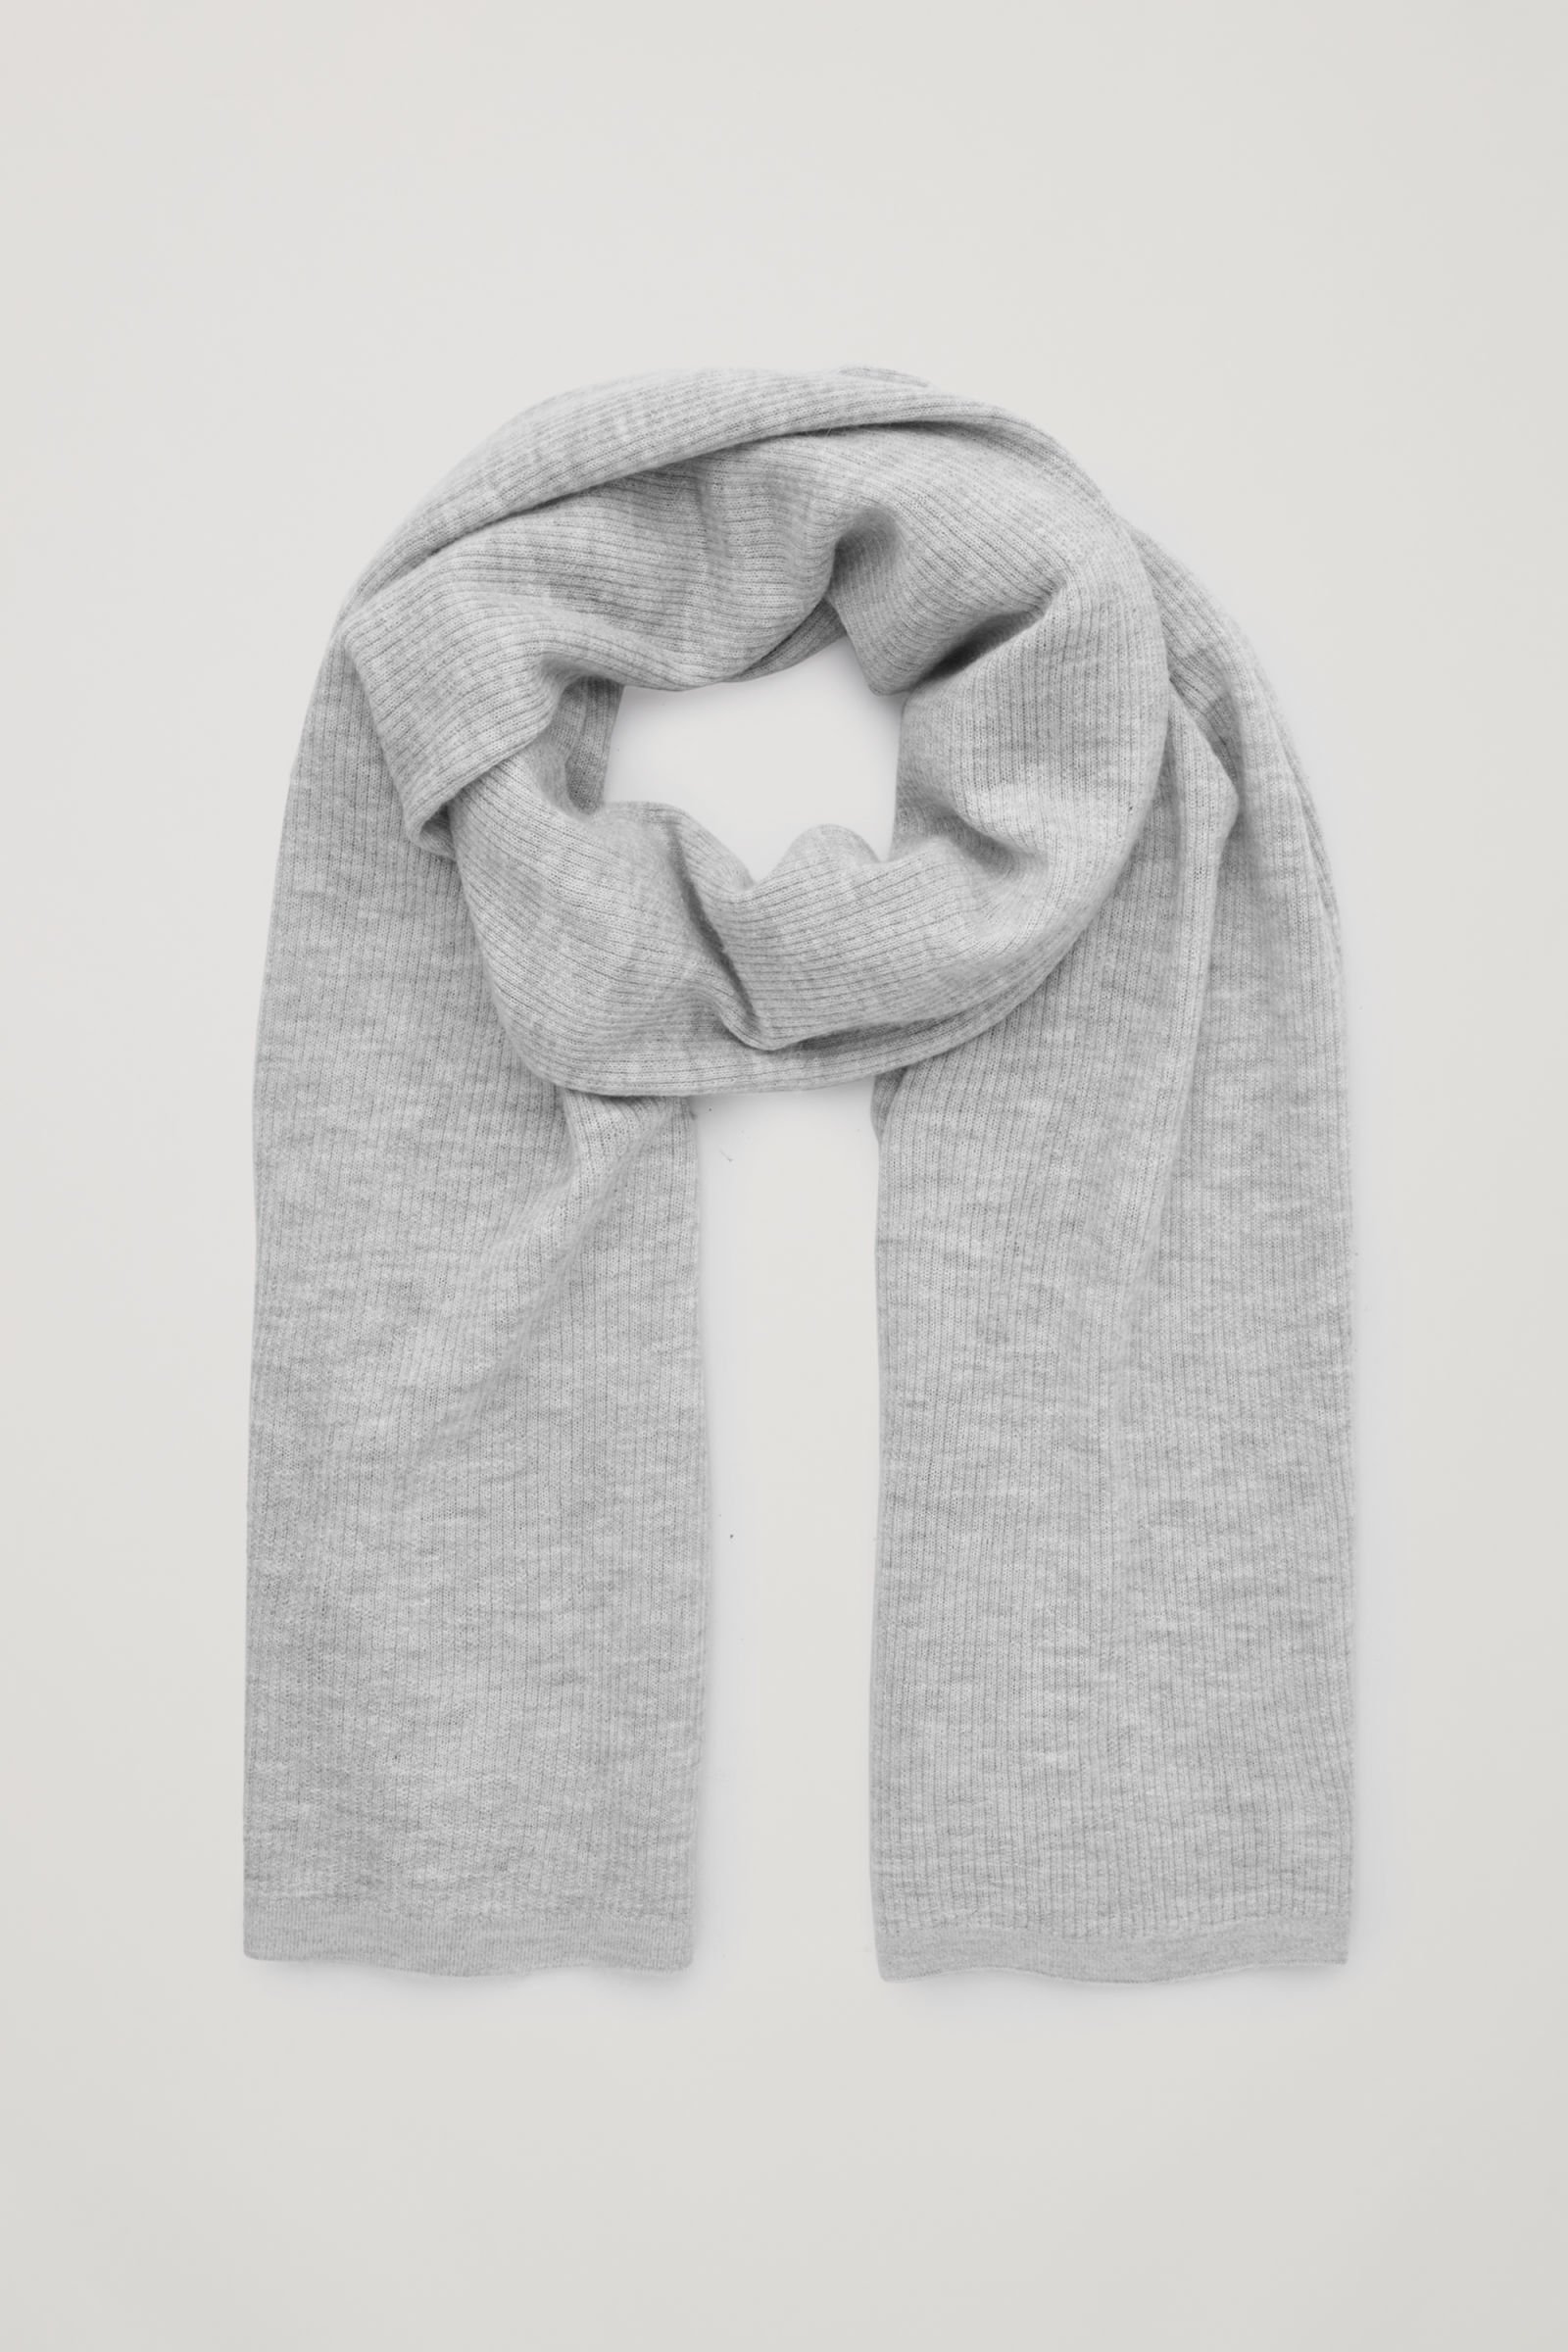 COS Ribbed Cashmere Scarf in light grey